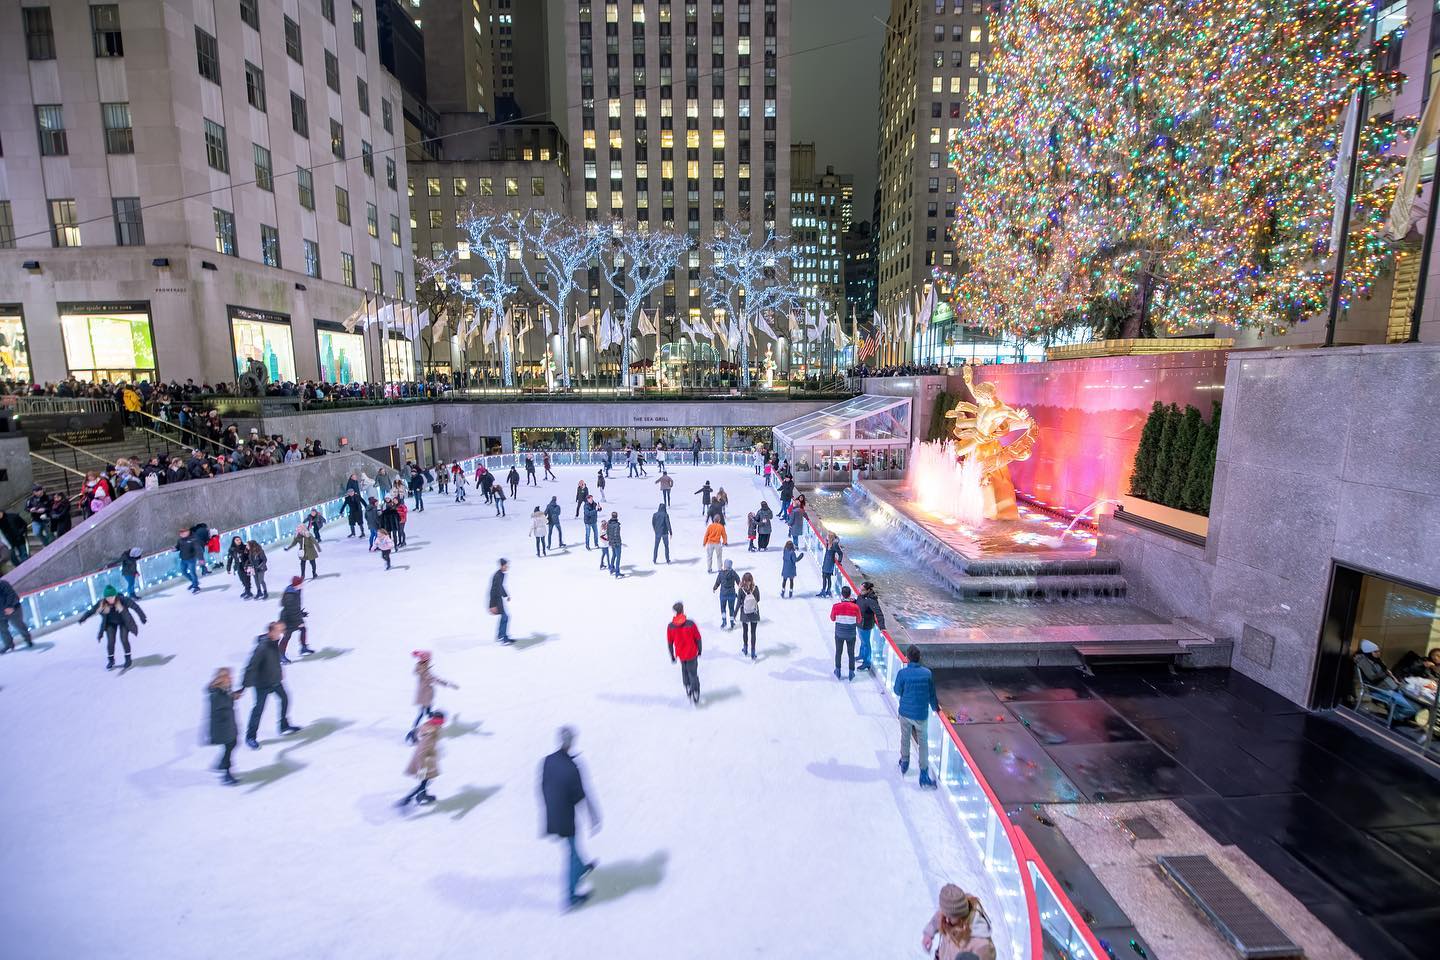 Chillier weather calls for a good coat to enjoy the crisp outdoors and there’s nothing better to do right now in NYC than ice skate. NY is home to several great rinks, and we’ve compiled an essentials guide for you to breeze in and start practicing your triple axel! Head over to the guide section of our feed to view the guide!

#iceskating#winter#nycwinter#elitelifstyle#nyclifestyle#fitness#health#wellness